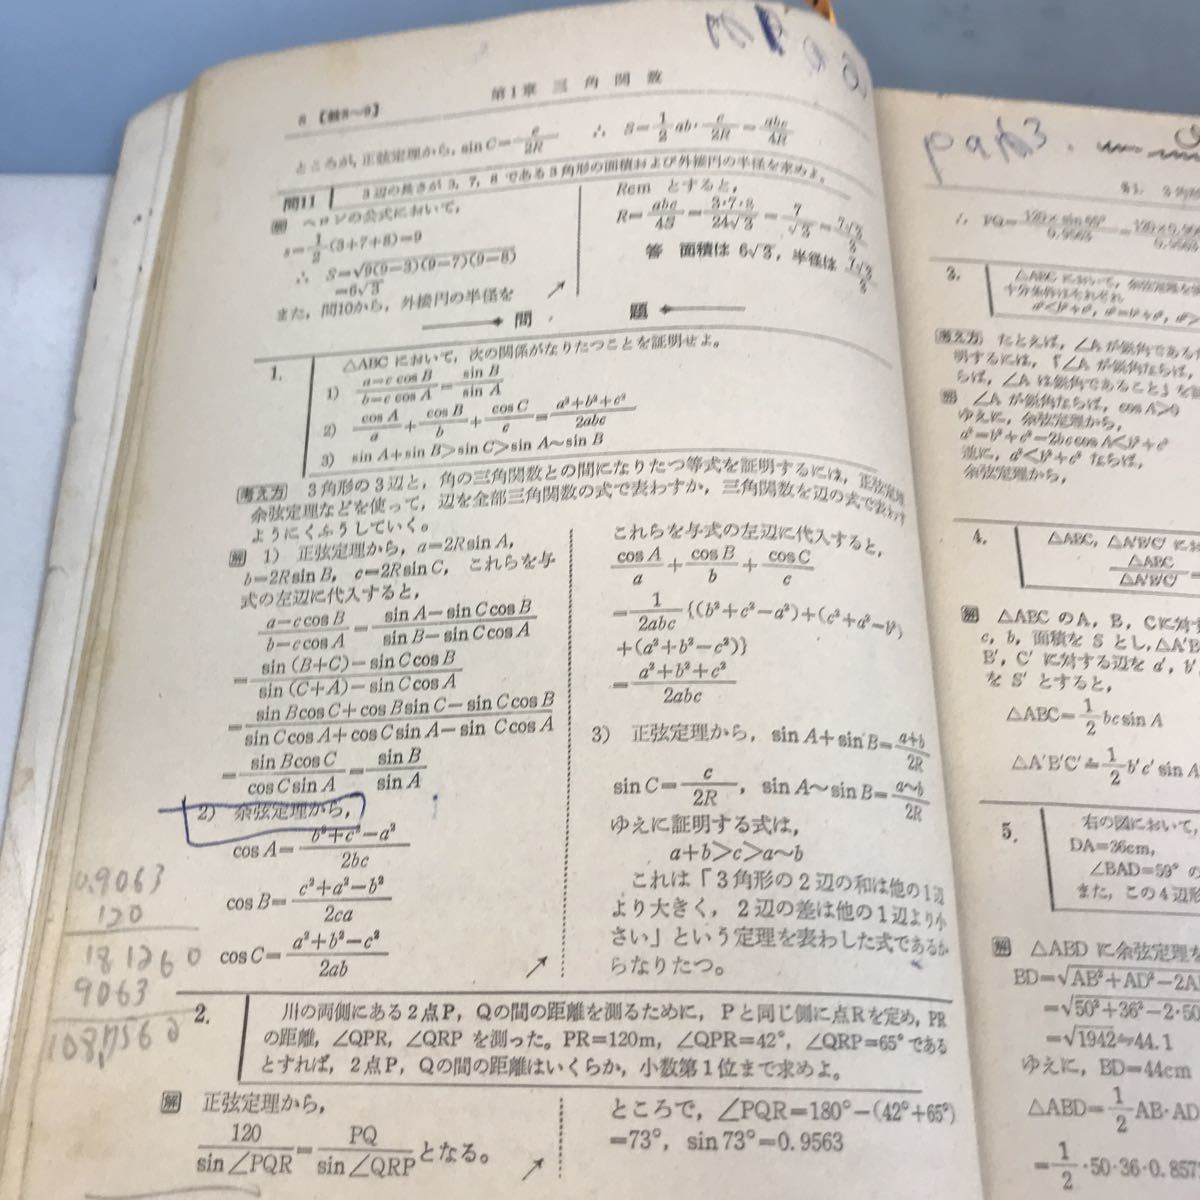 A56-112 textbook radar high school mathematics ⅡB real . publish version basis writing . paper . writing great number equipped crack equipped.